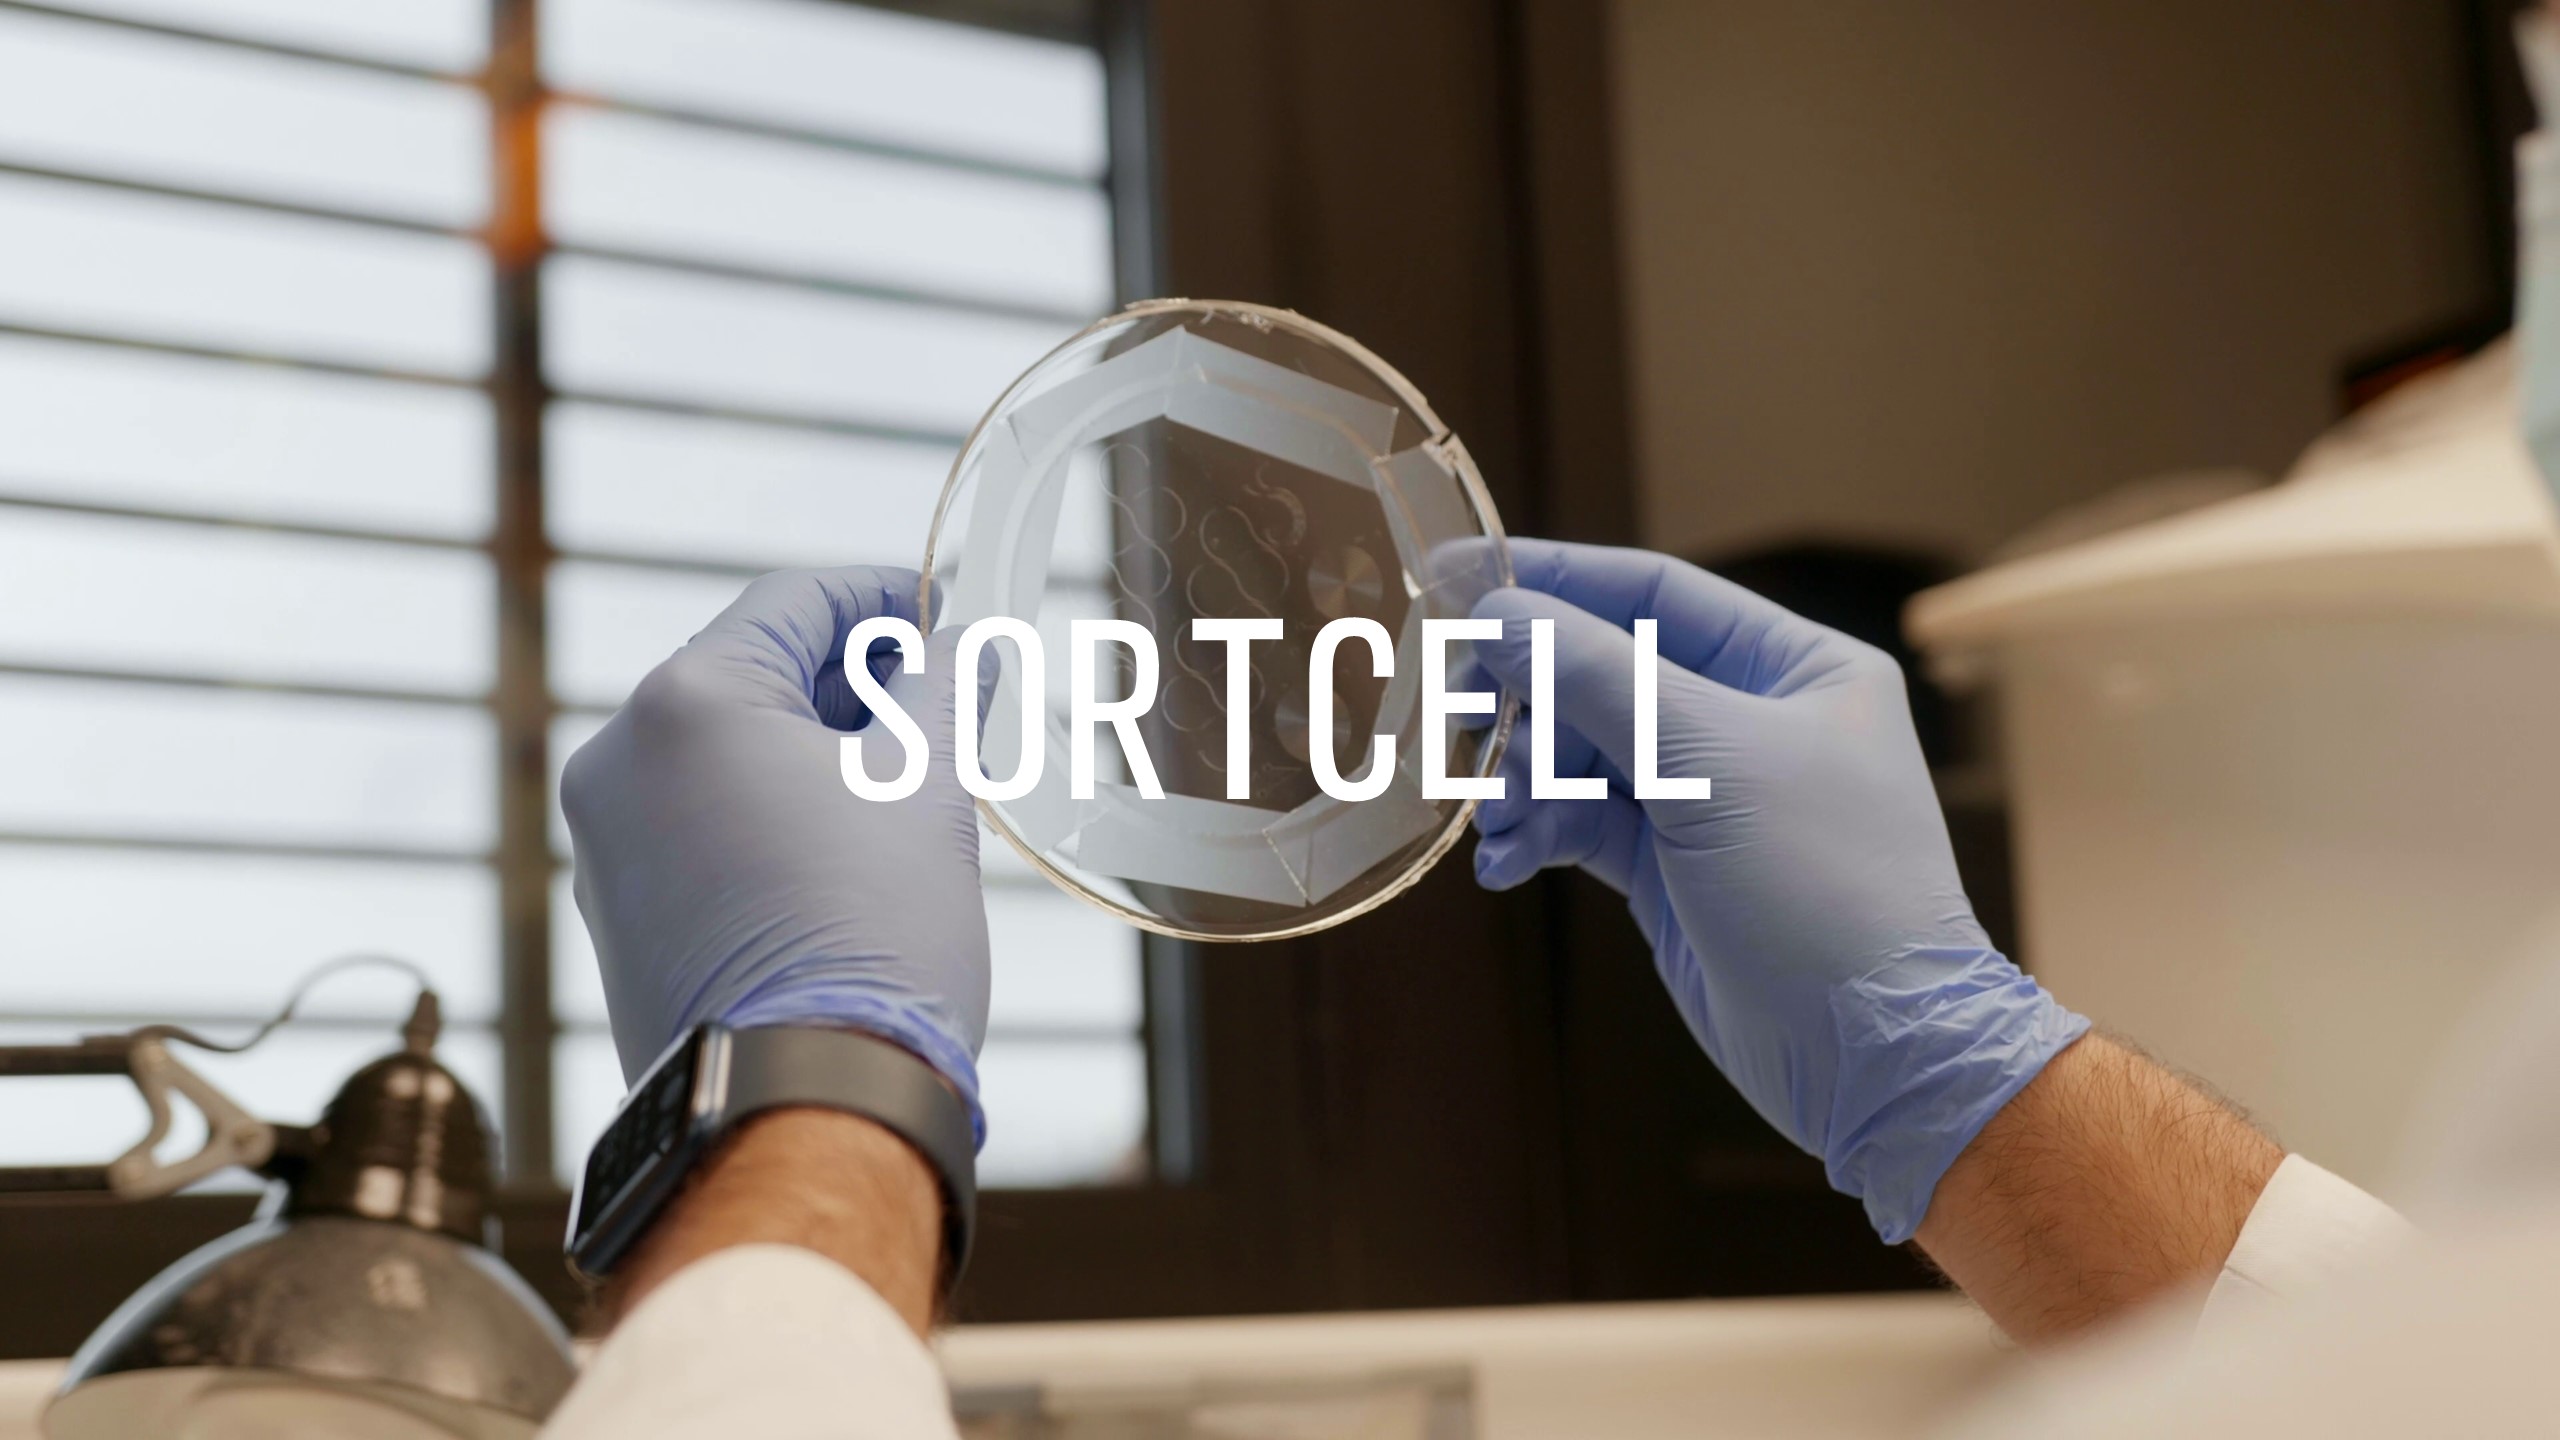 SORTCELL